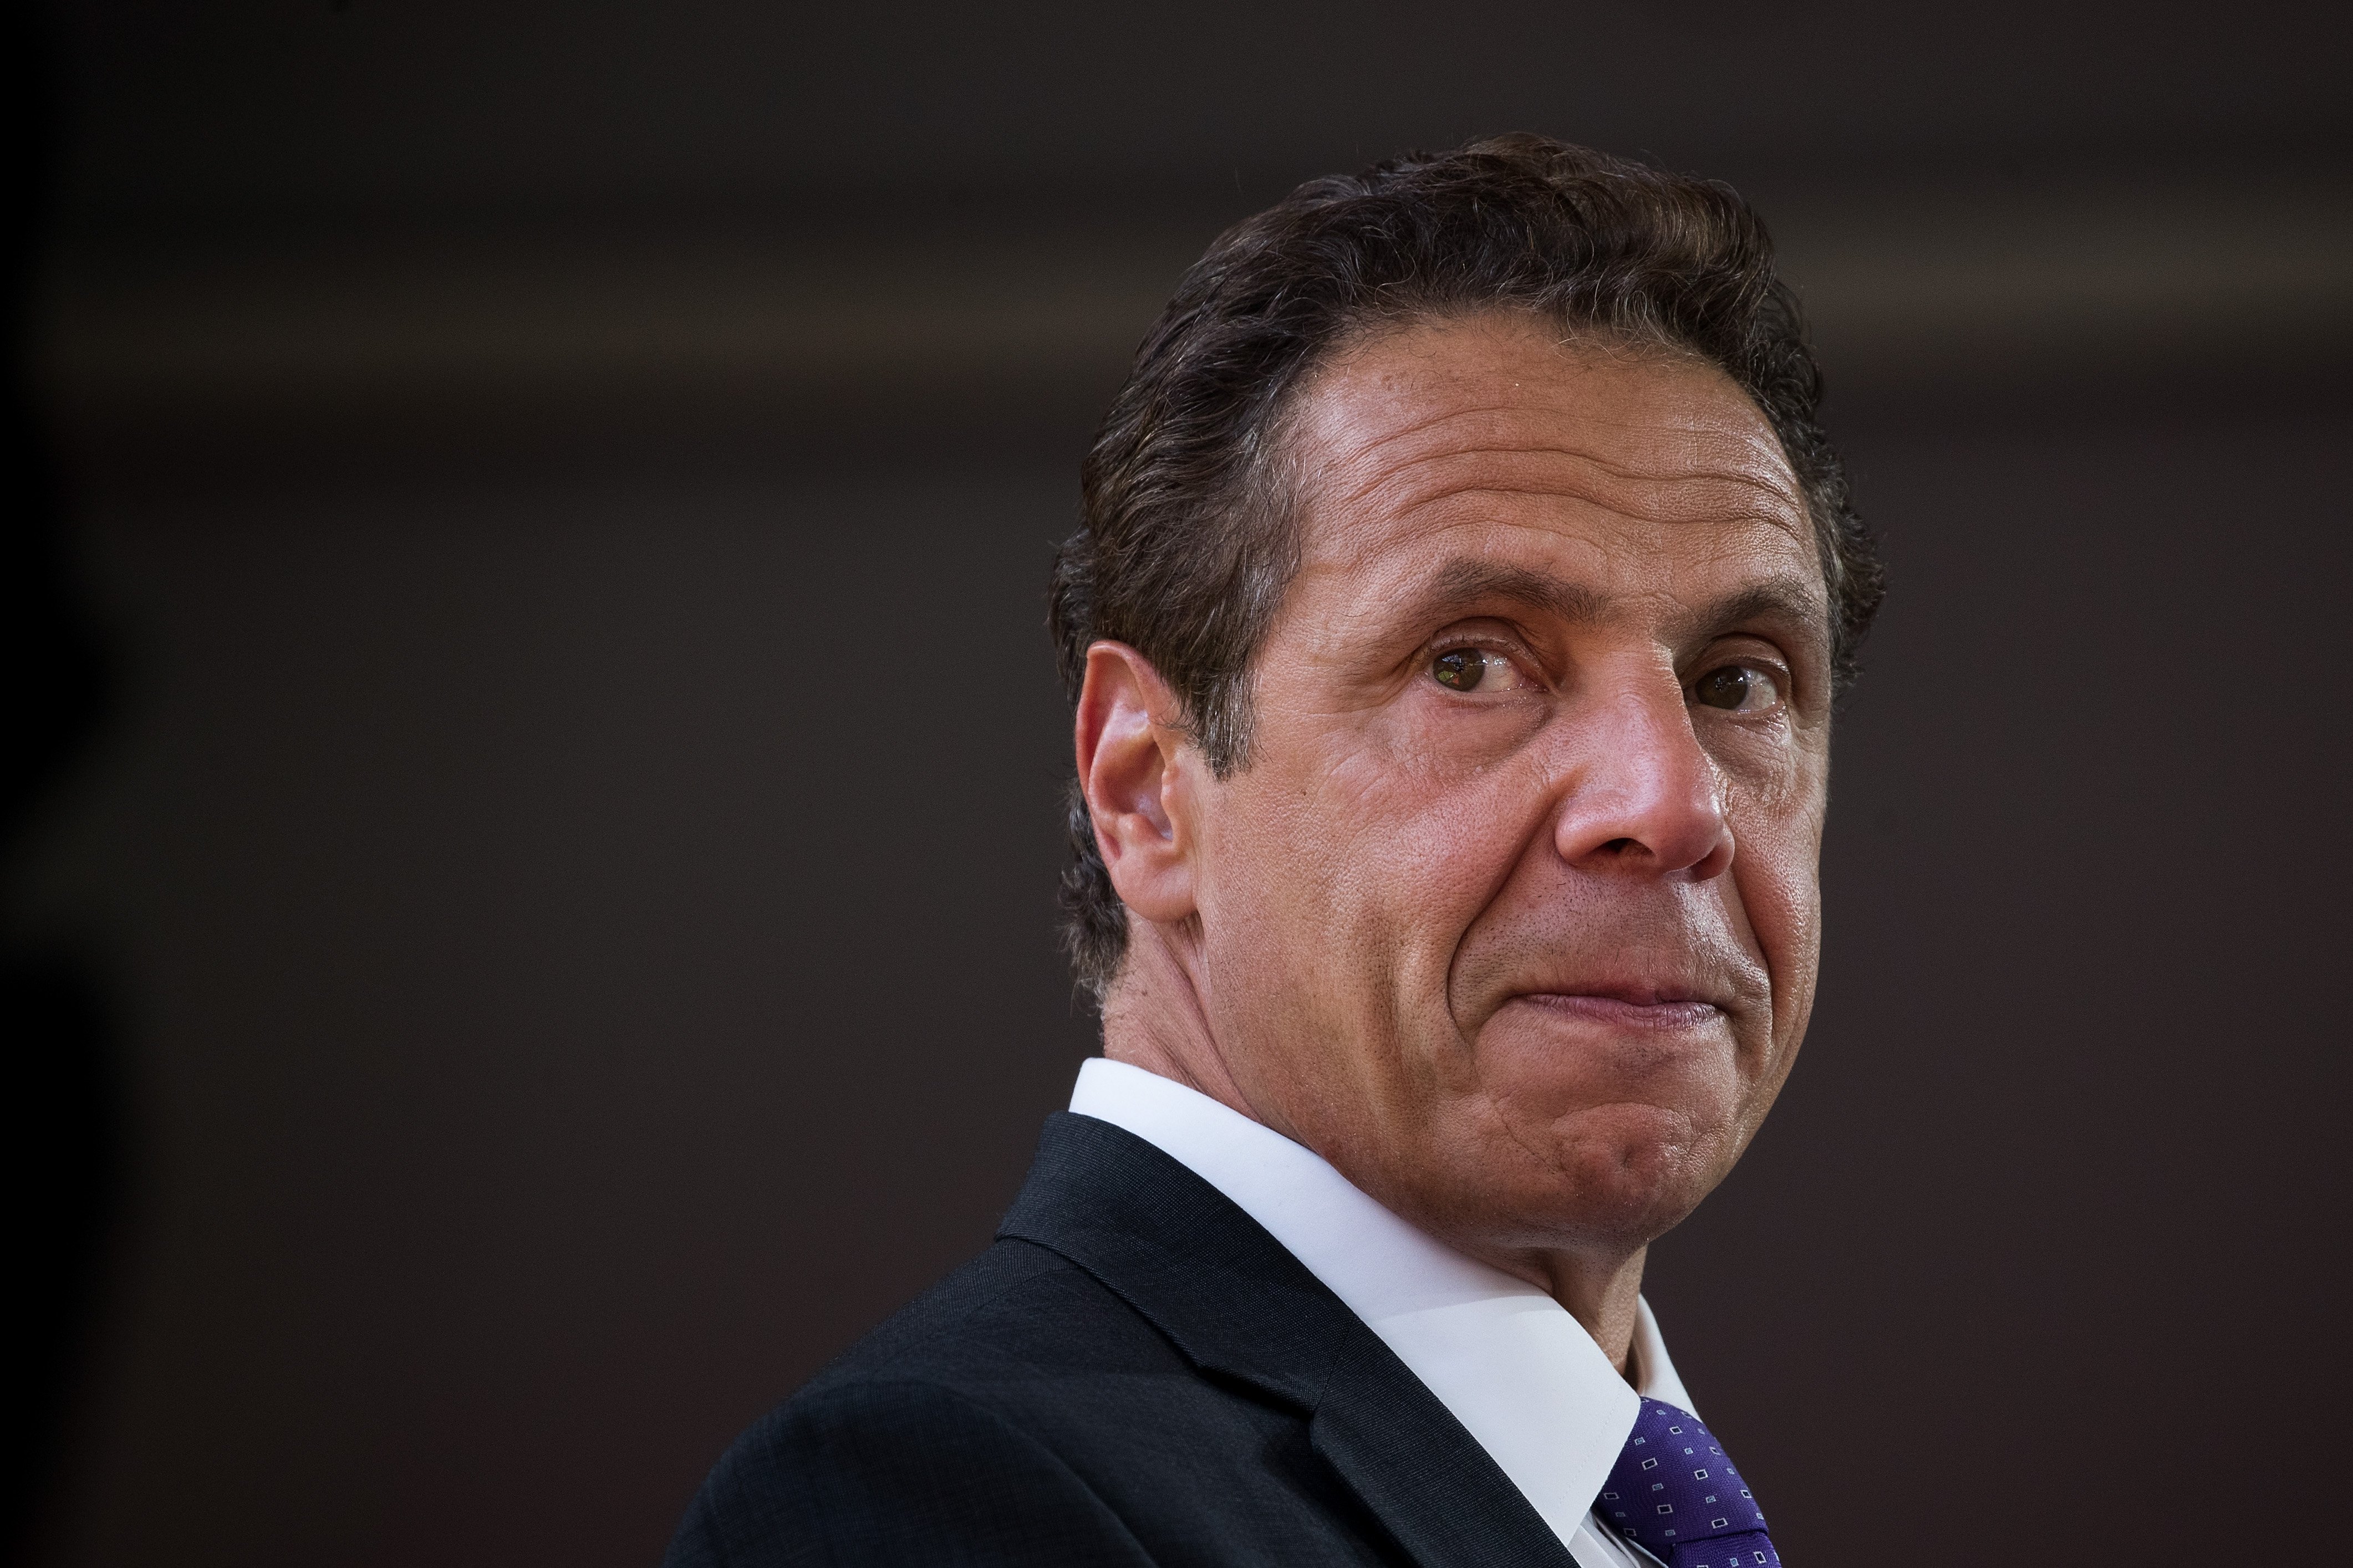  New York Governor Andrew Cuomo during a dedication ceremony to mark the opening of the new campus of Cornell Tech on Roosevelt Island, September 13, 2017 in New York City. | Photo: GettyImages